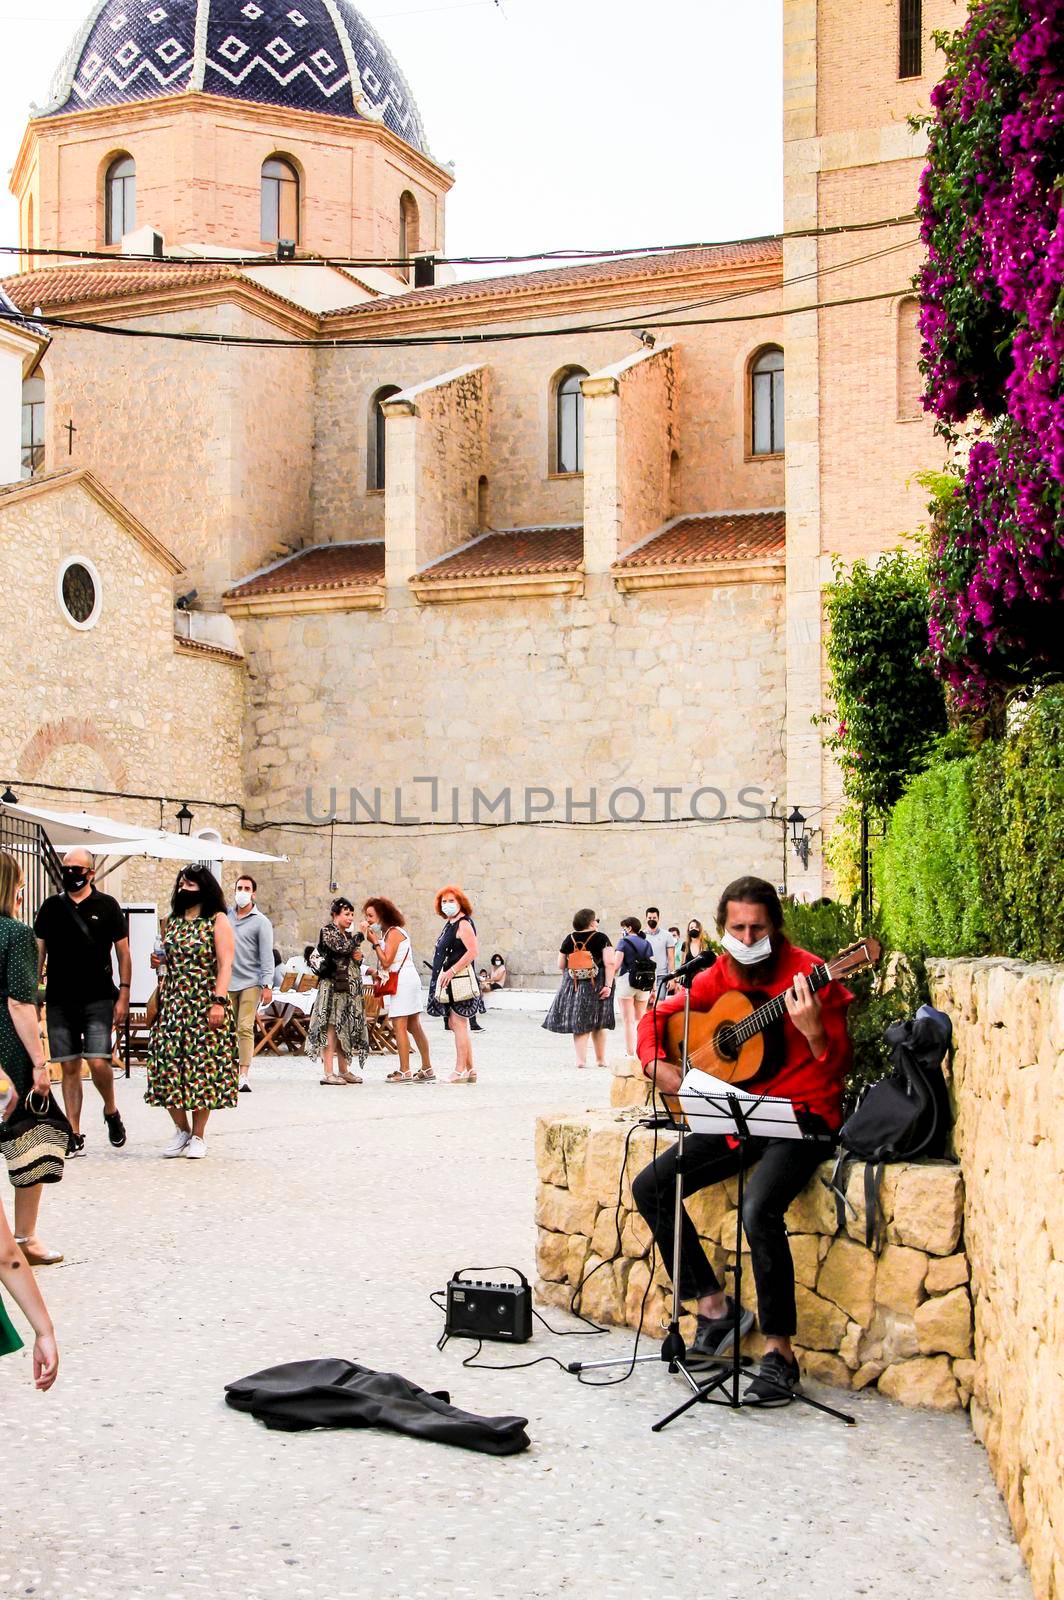 Musician playing the guitar in the main square of Altea village by soniabonet